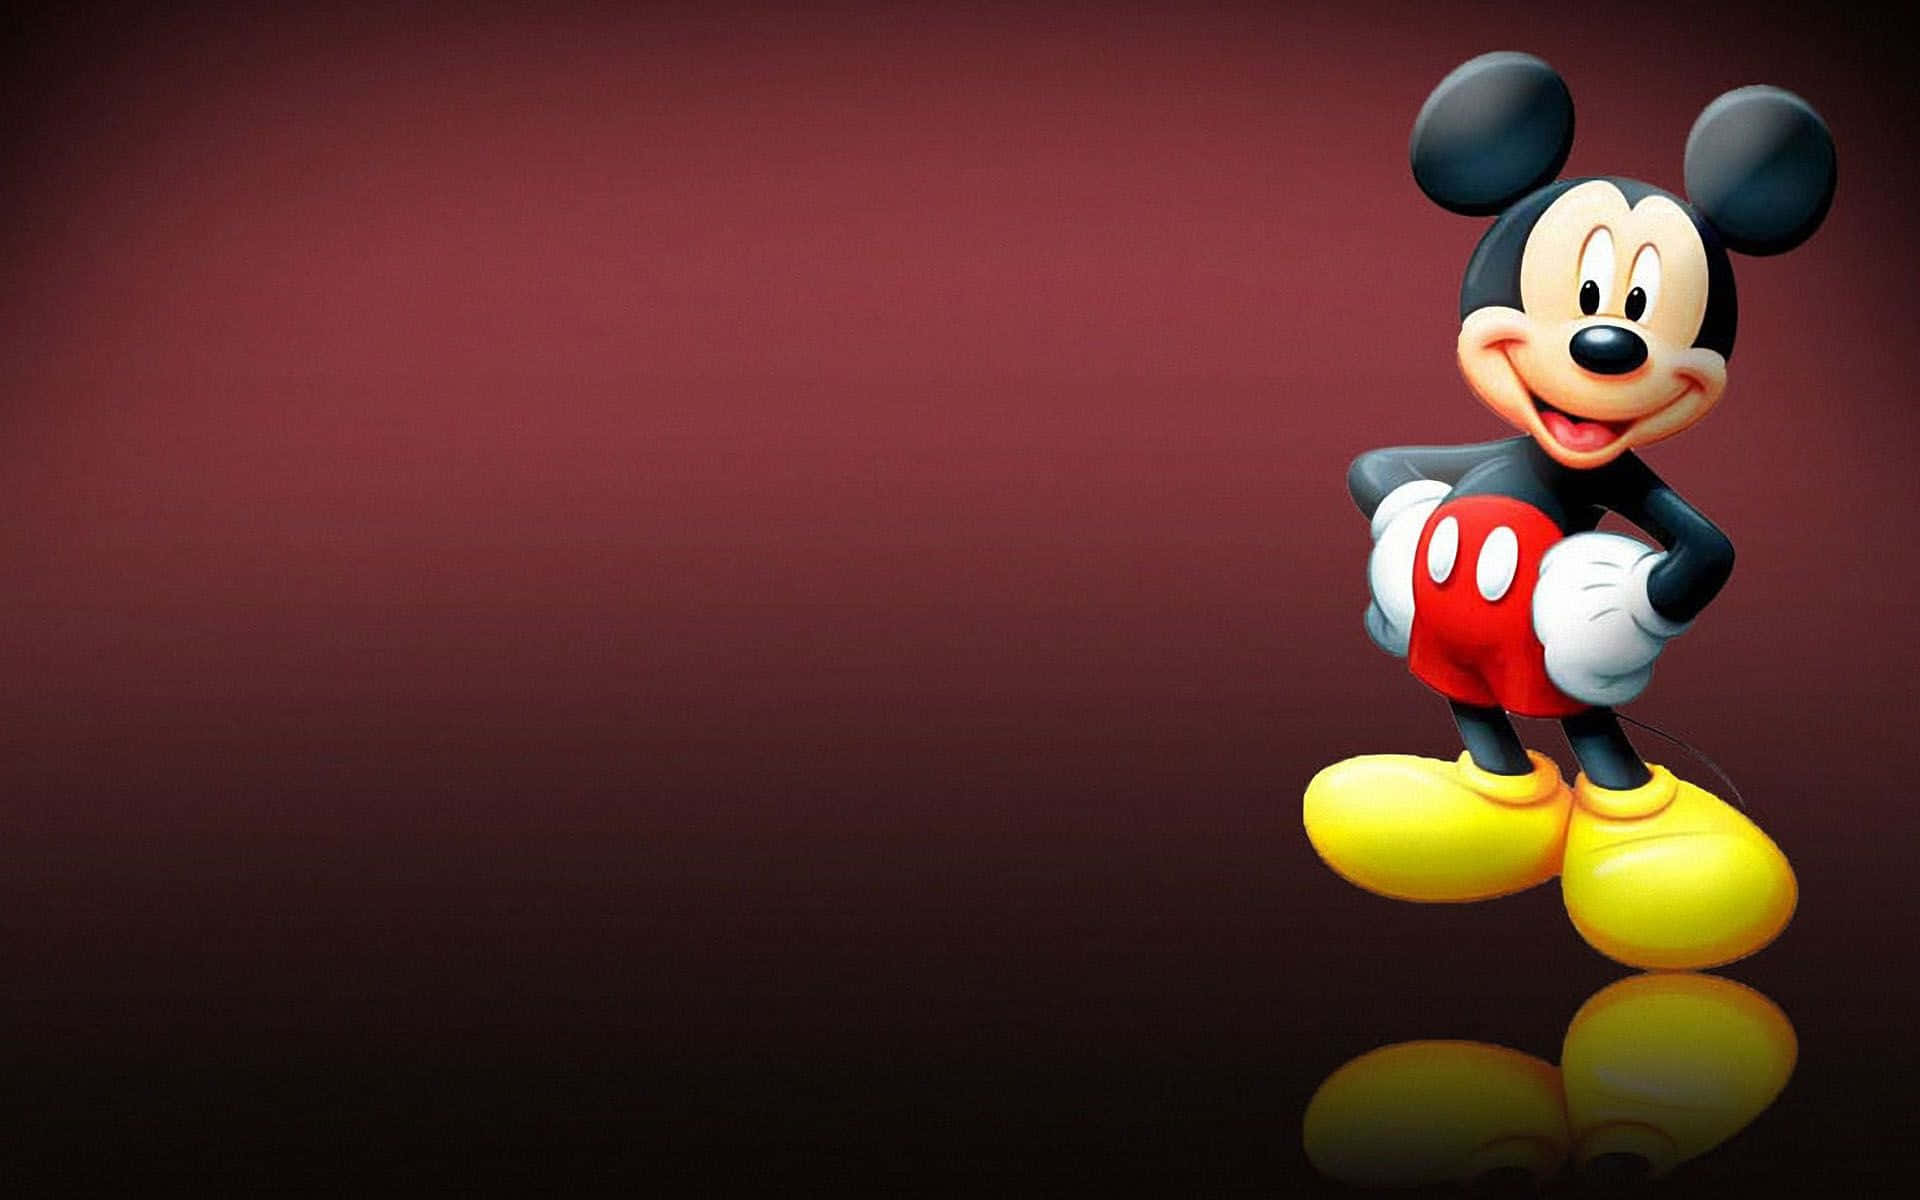 Mickey's sweetness will make your day better! Wallpaper